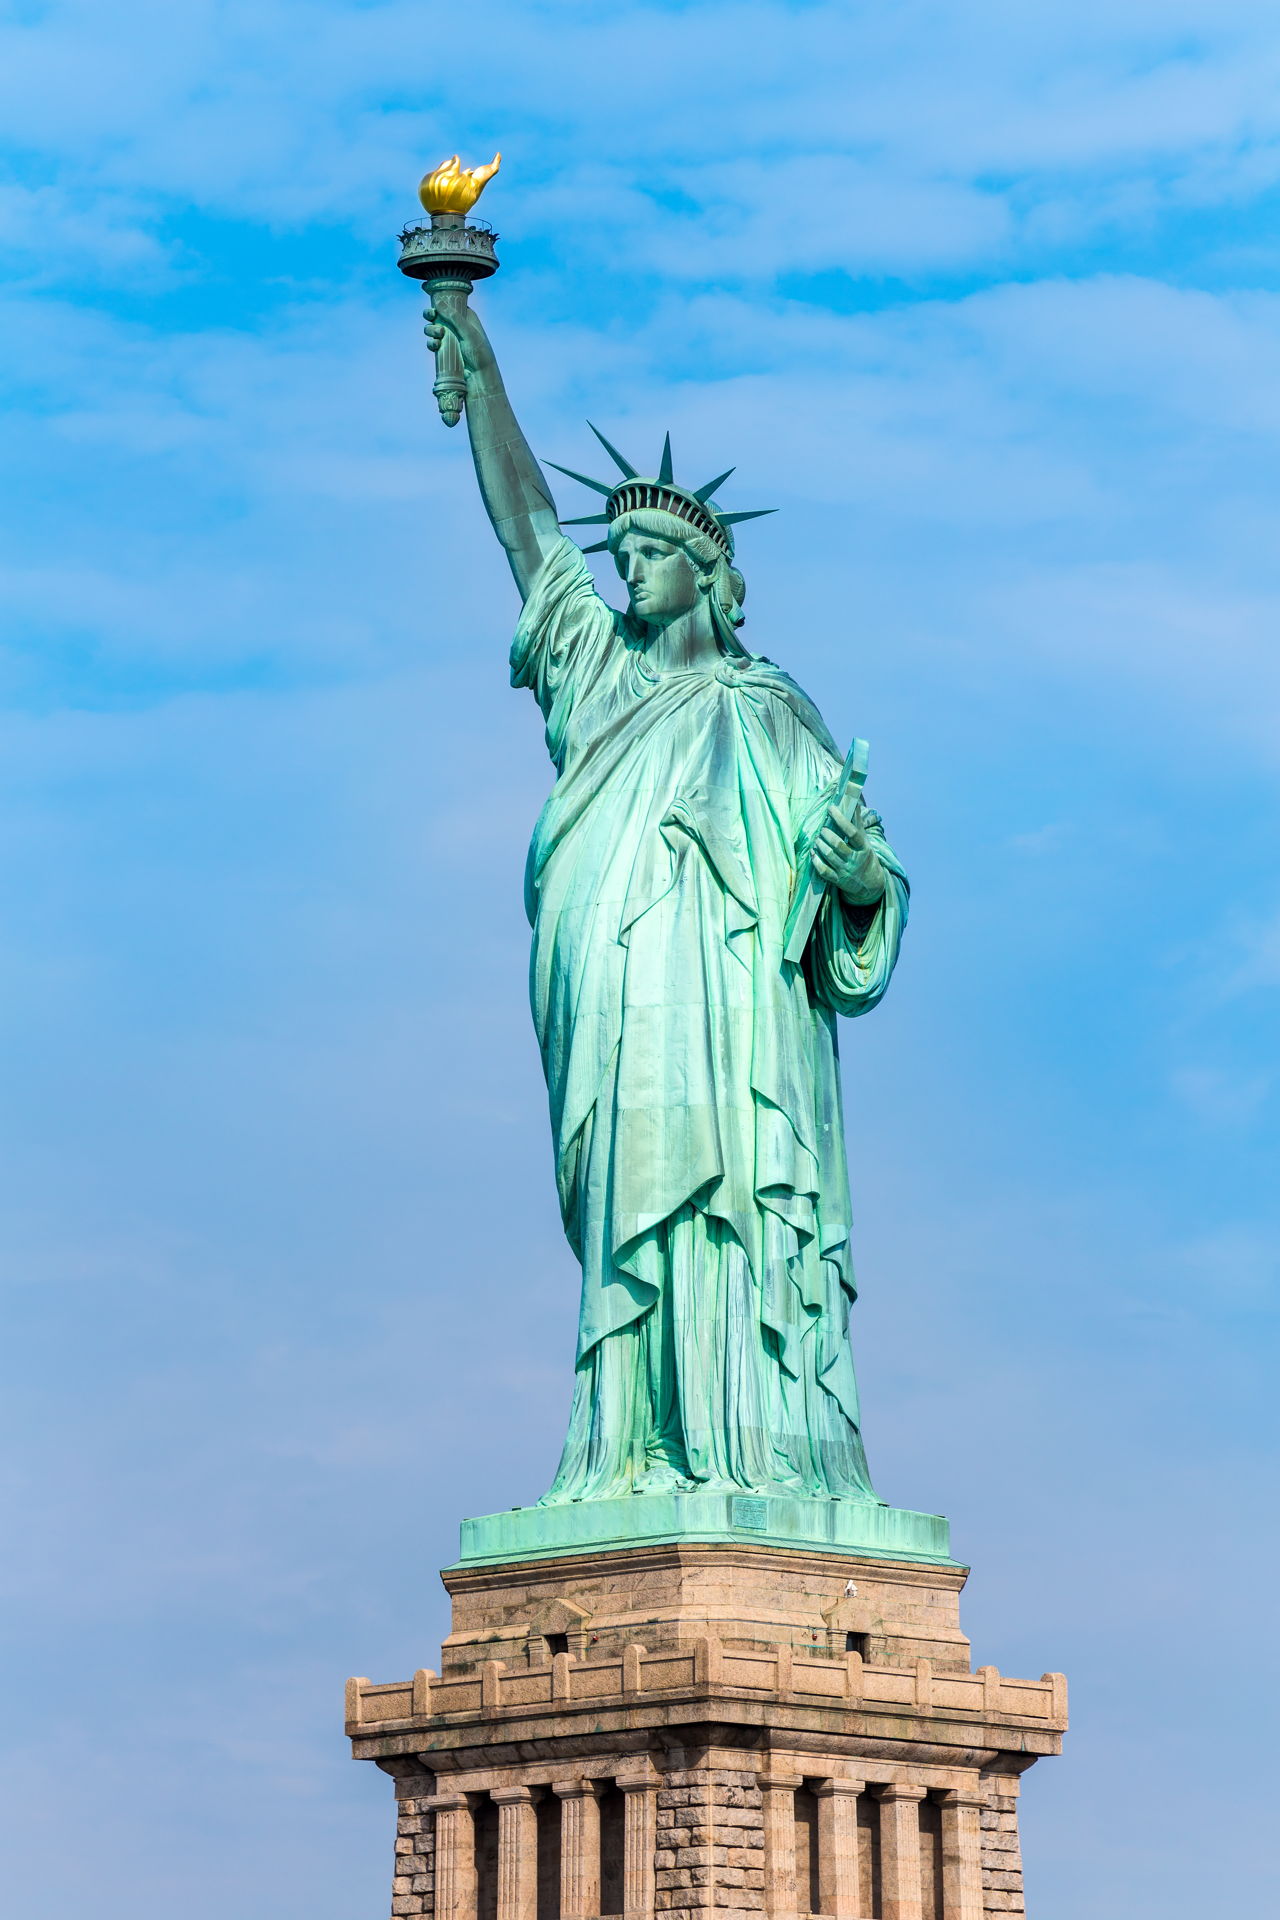 The Symbolism of the Inscription on the Statue of Liberty